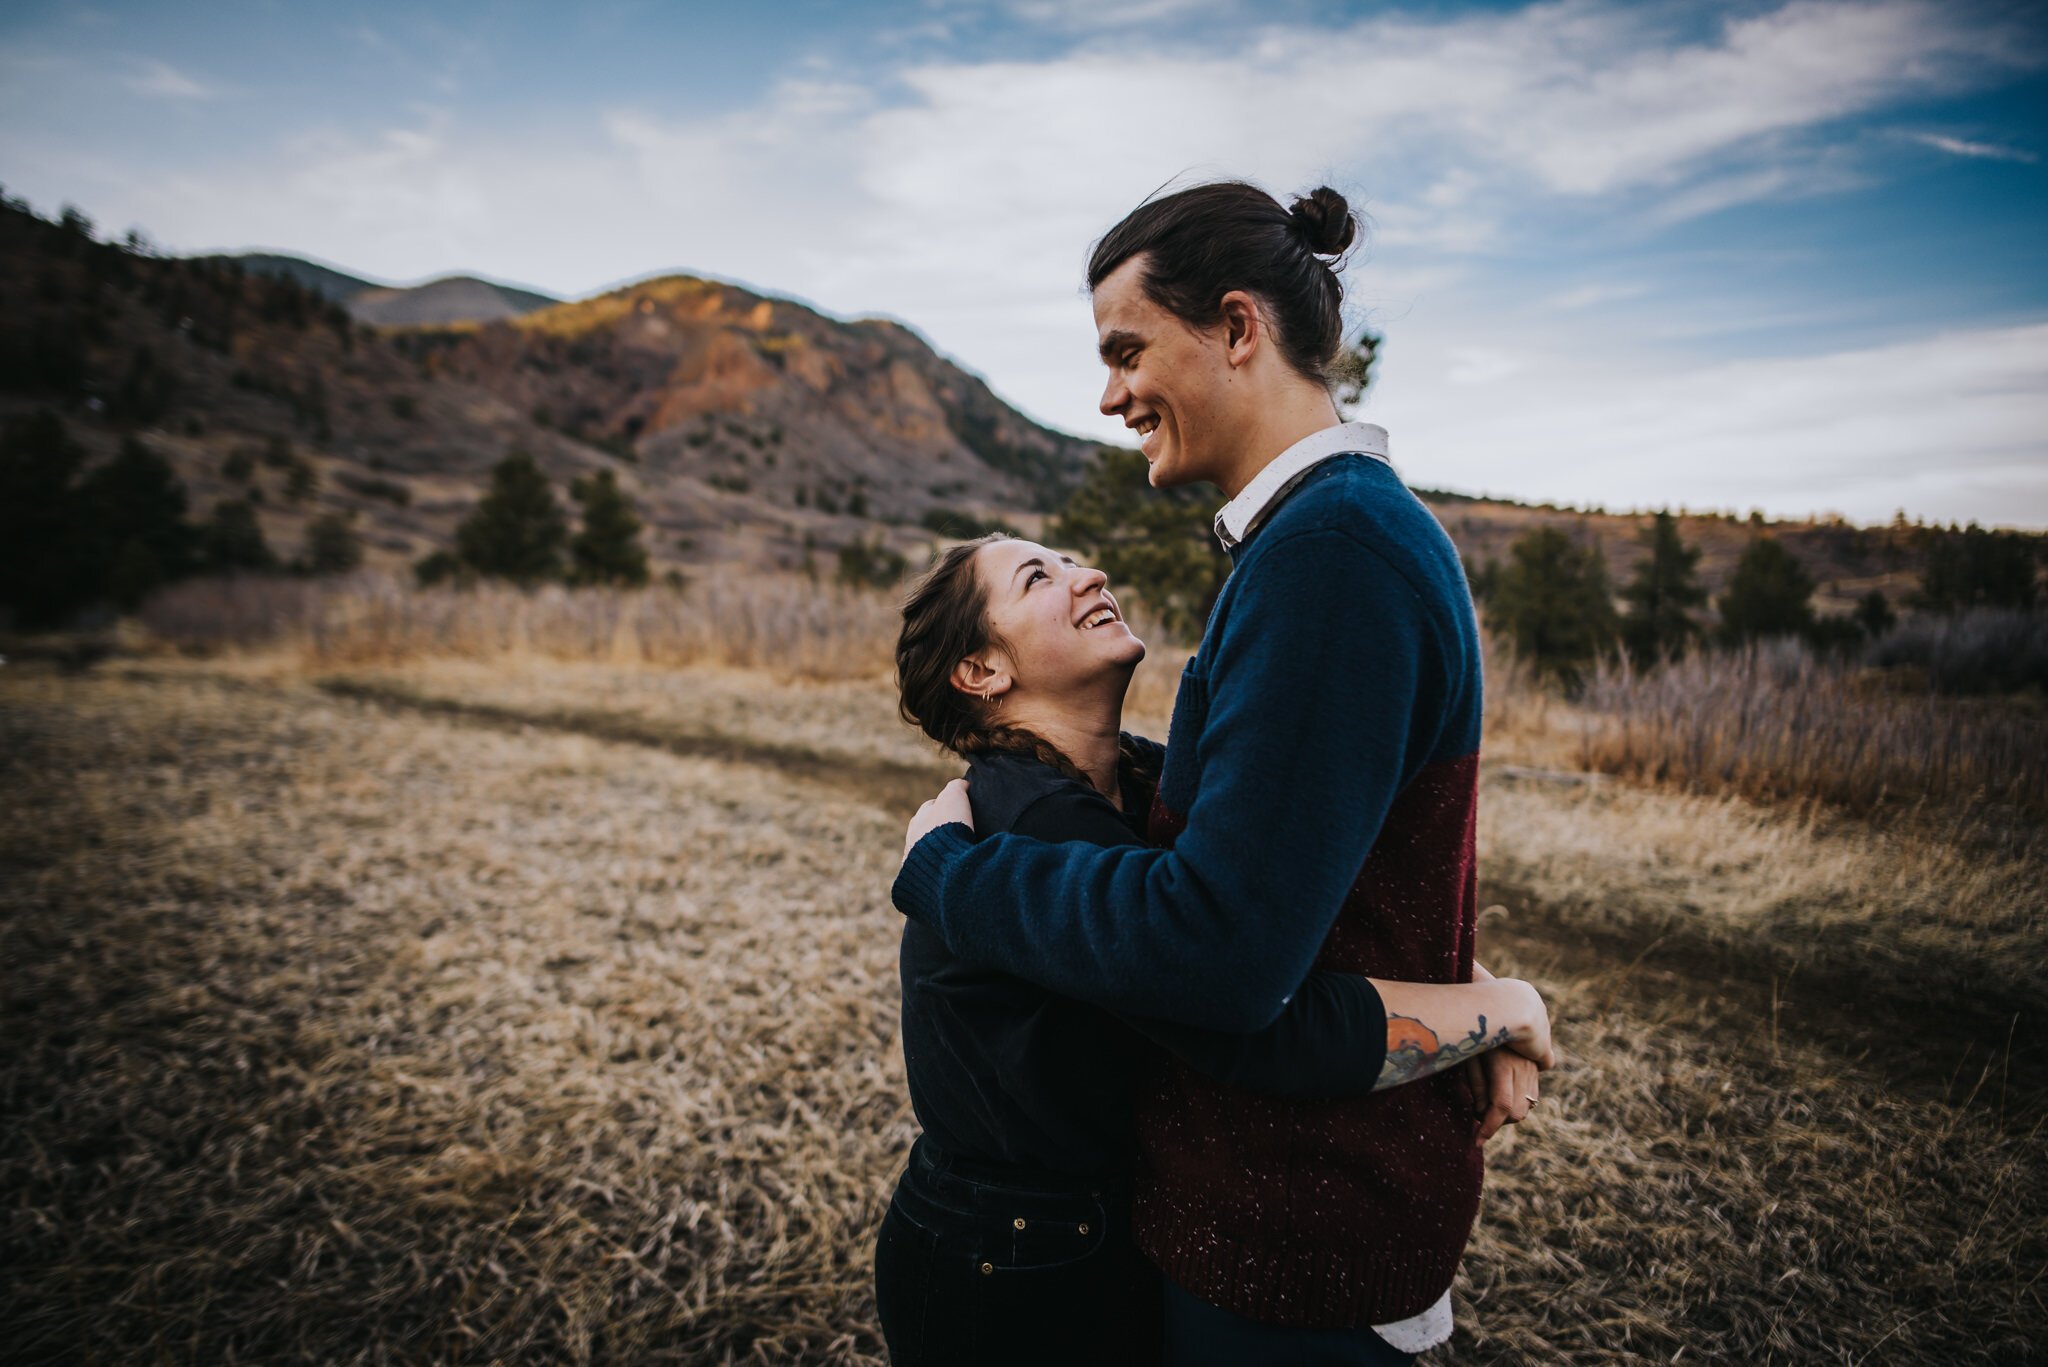 Yulia+and+Logan+Couples+Session+Colorado+Springs+Colorado+Sunset+Cheyenne+Canyon+Husband+Wife+Wild+Prairie+Photography-17-2020.jpeg